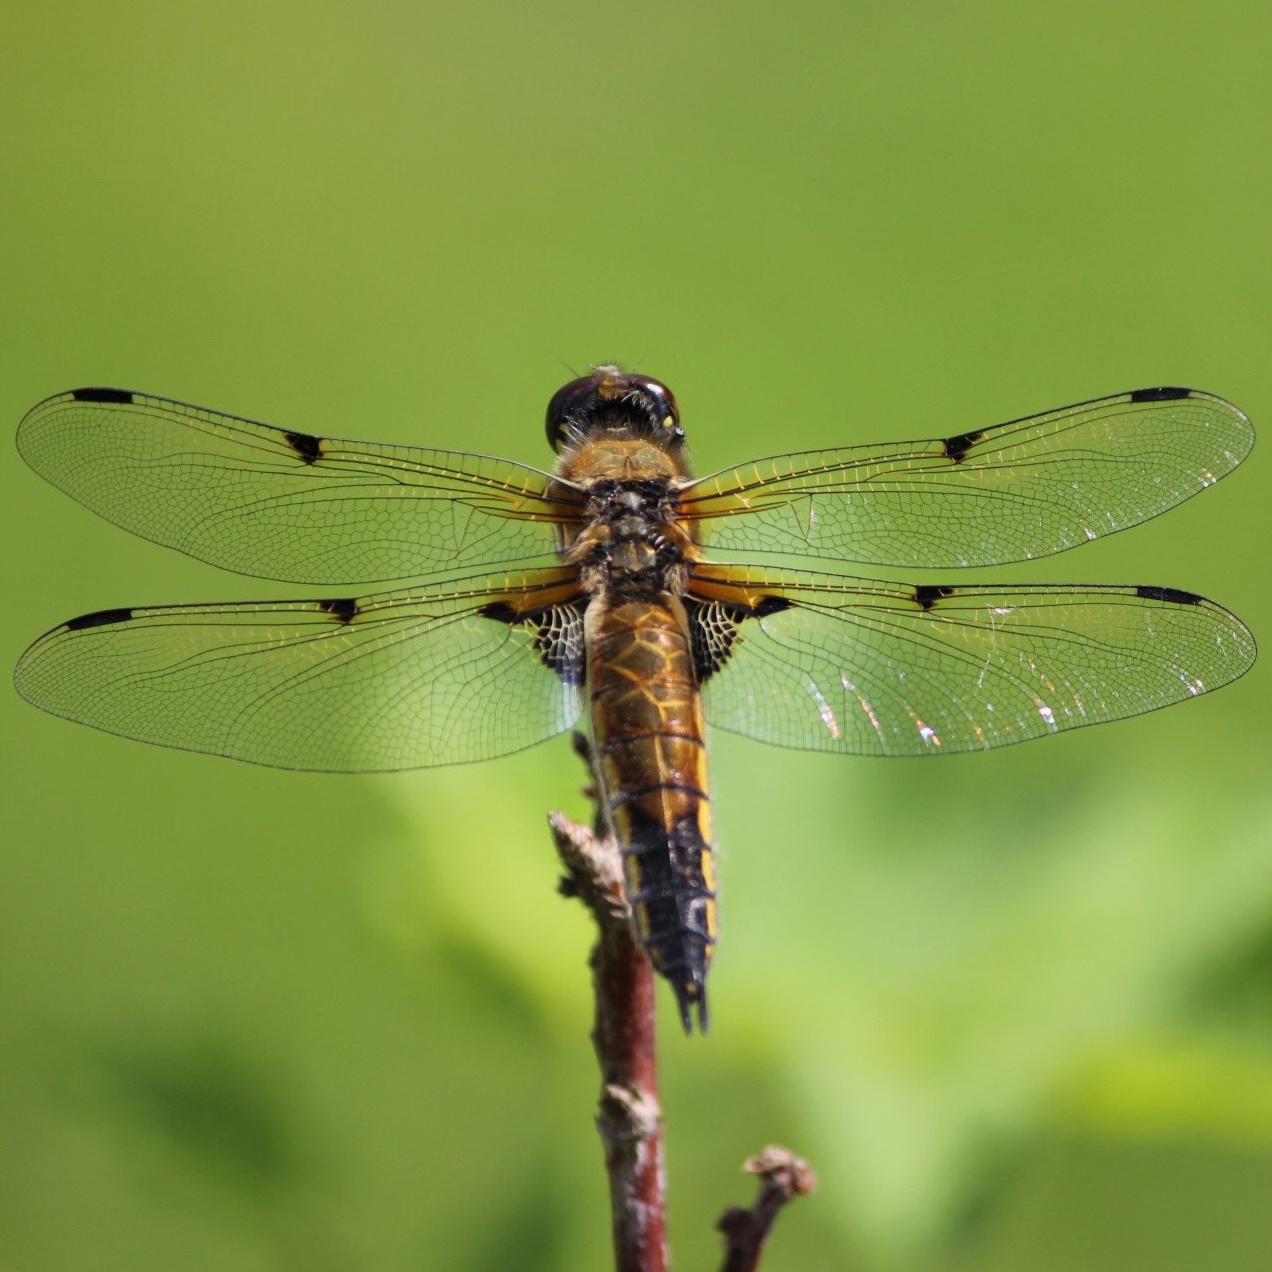 A dragonfly rests on a twig.